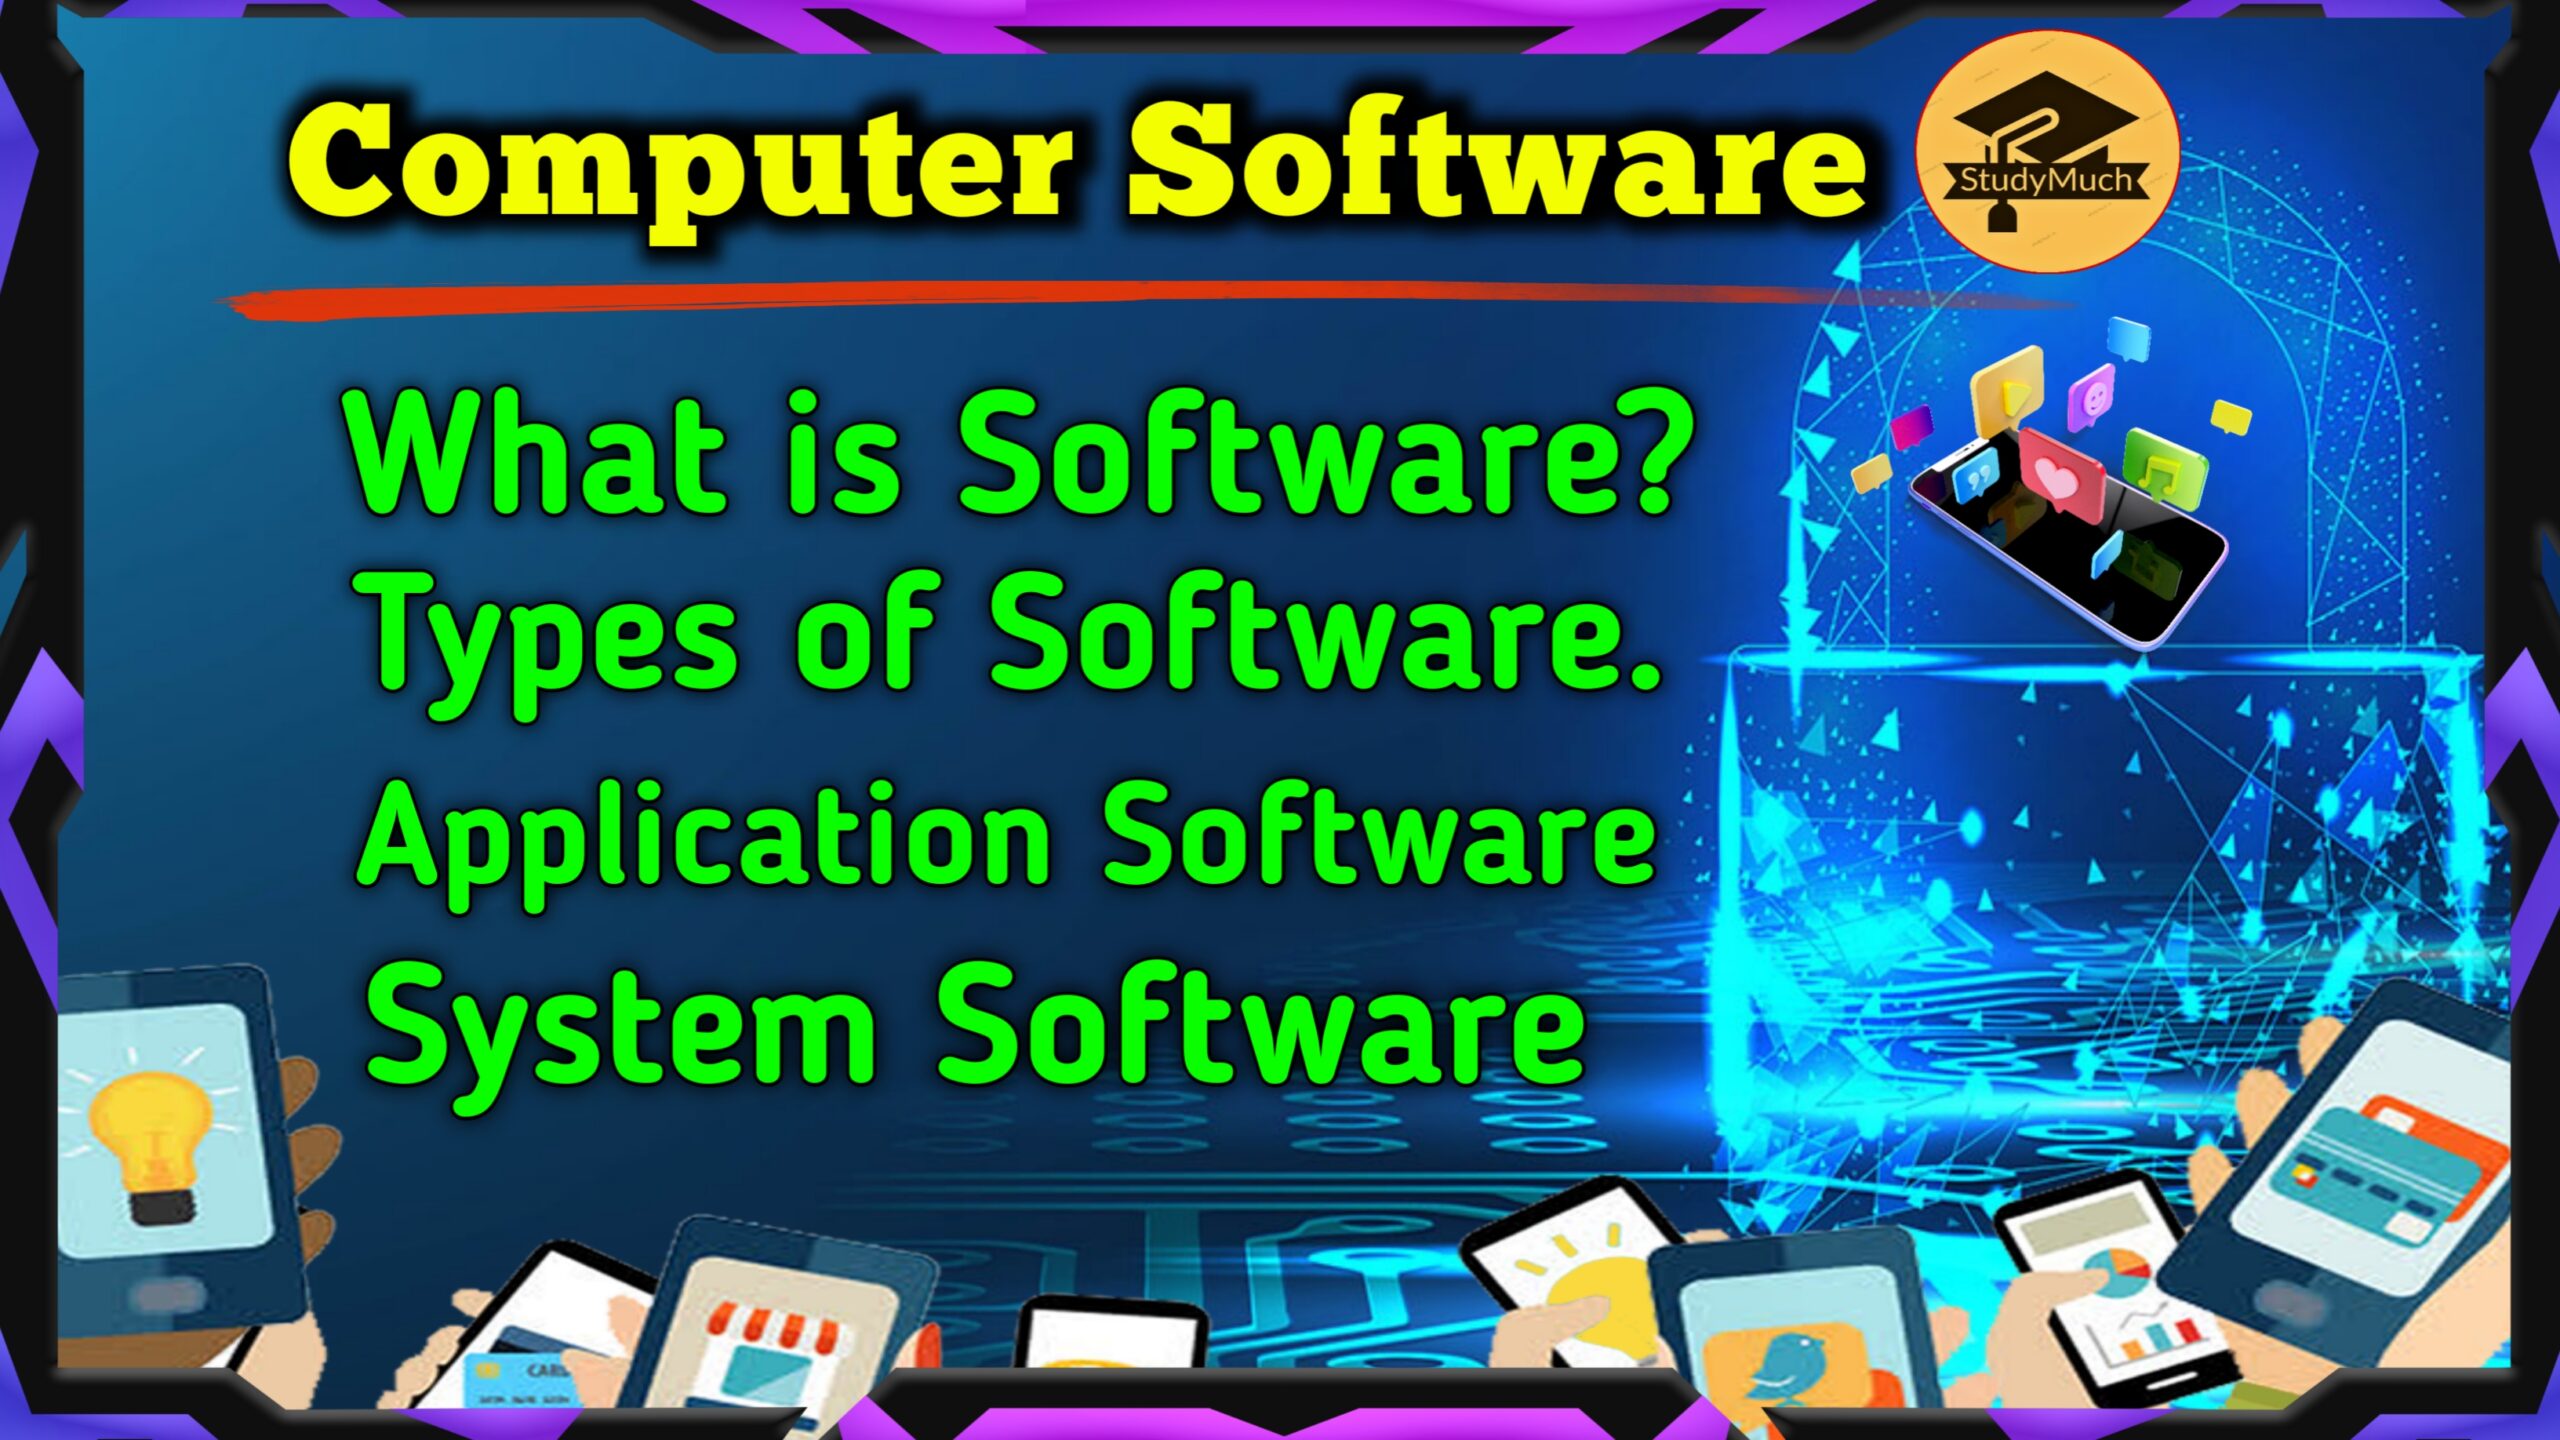 Computer Software studymuch.in